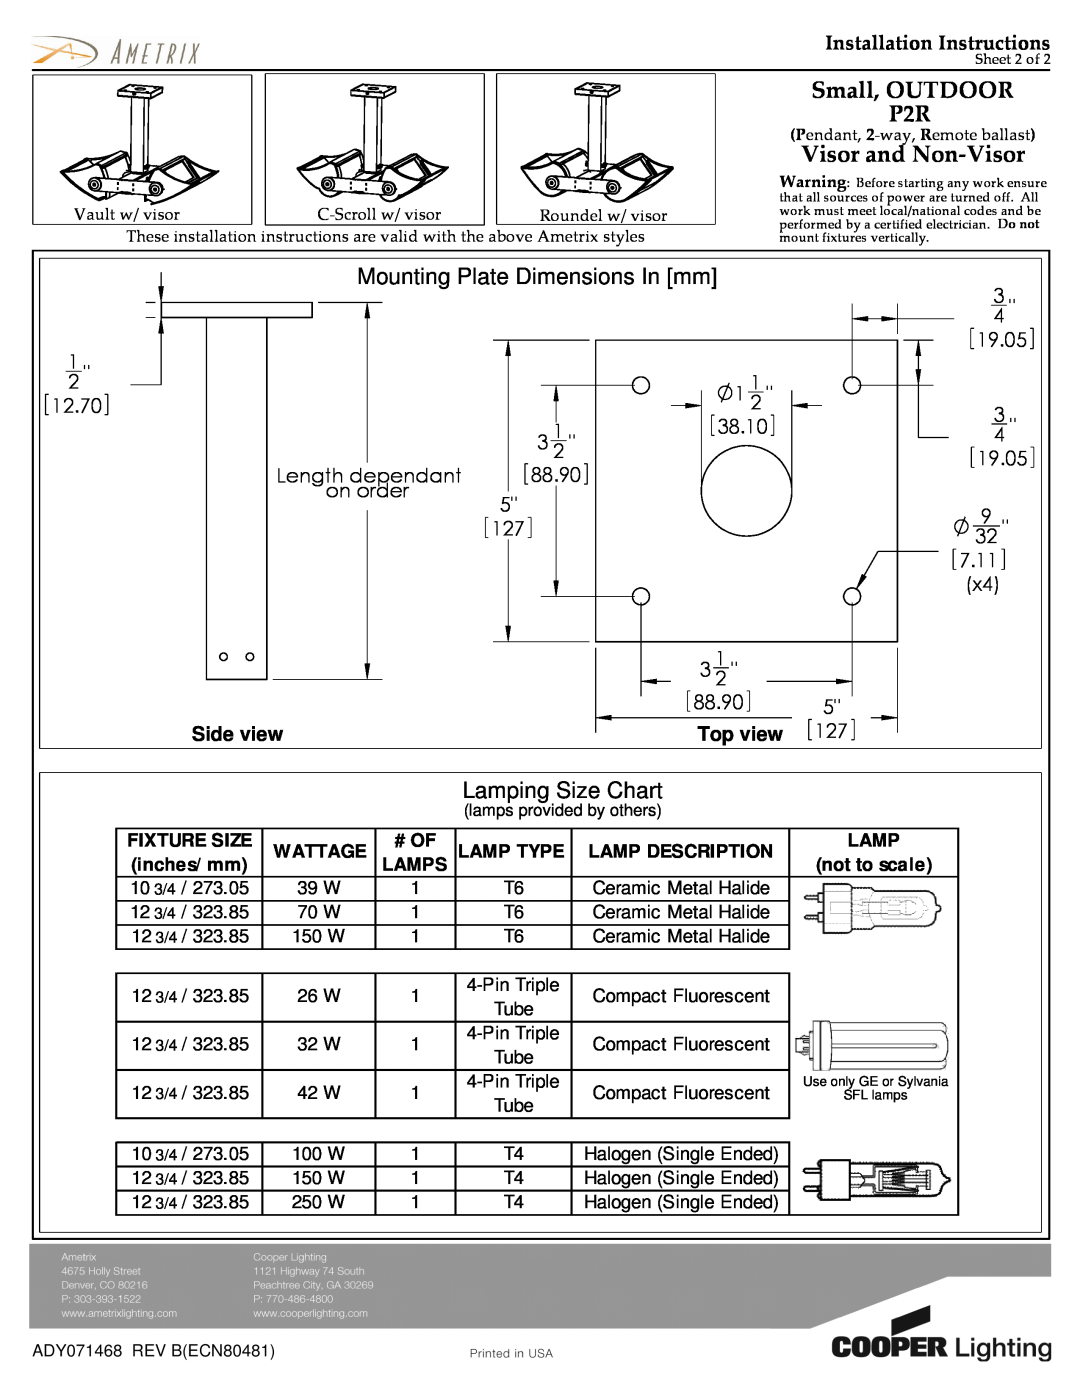 Cooper Lighting ADY071468 Small, OUTDOOR P2R, Visor and Non-Visor, Mounting Plate Dimensions In mm, Lamping Size Chart 